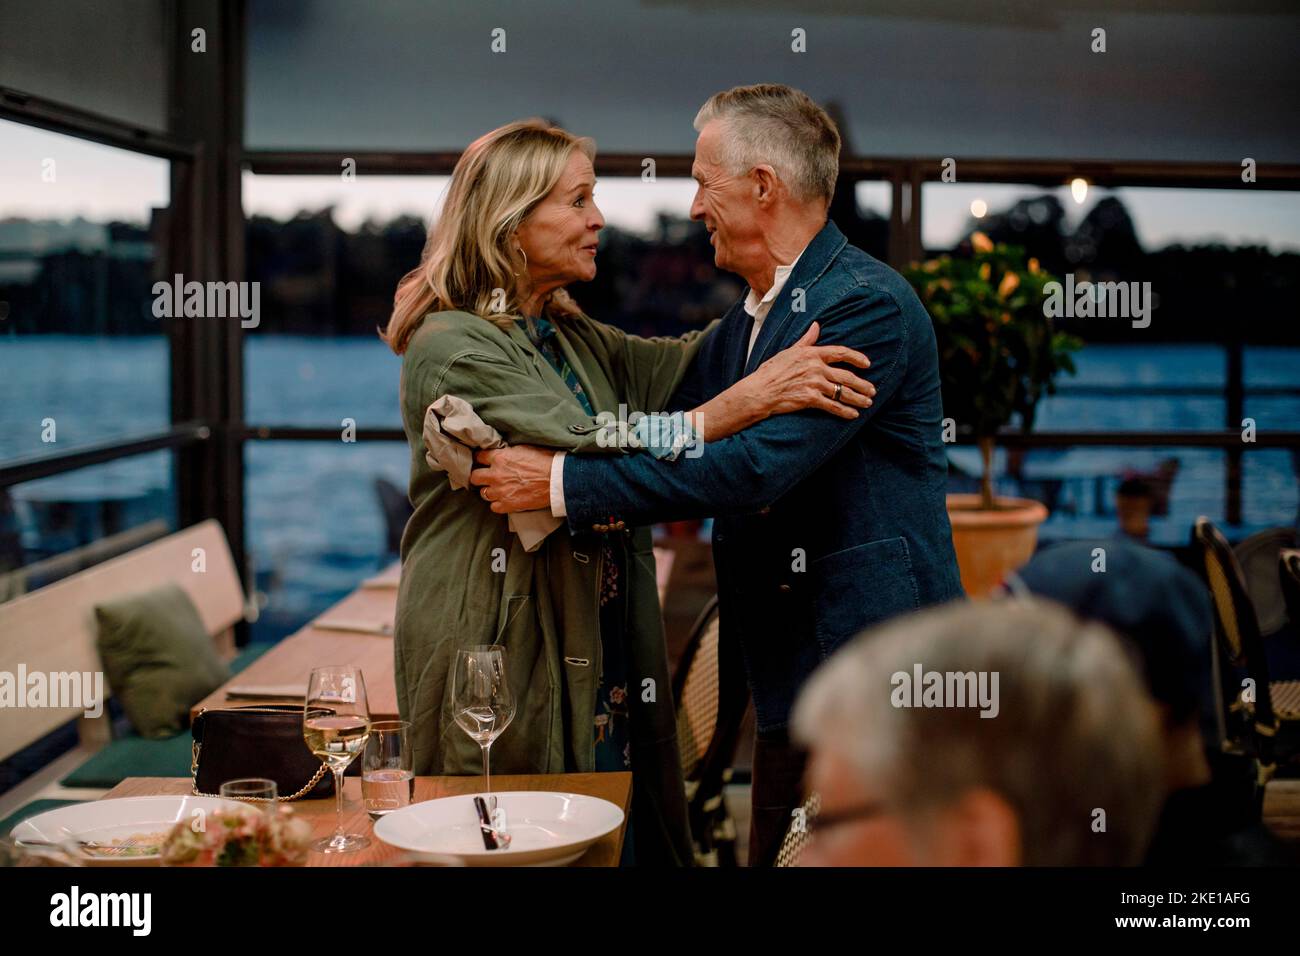 Smiling senior couple greeting each other in restaurant Stock Photo